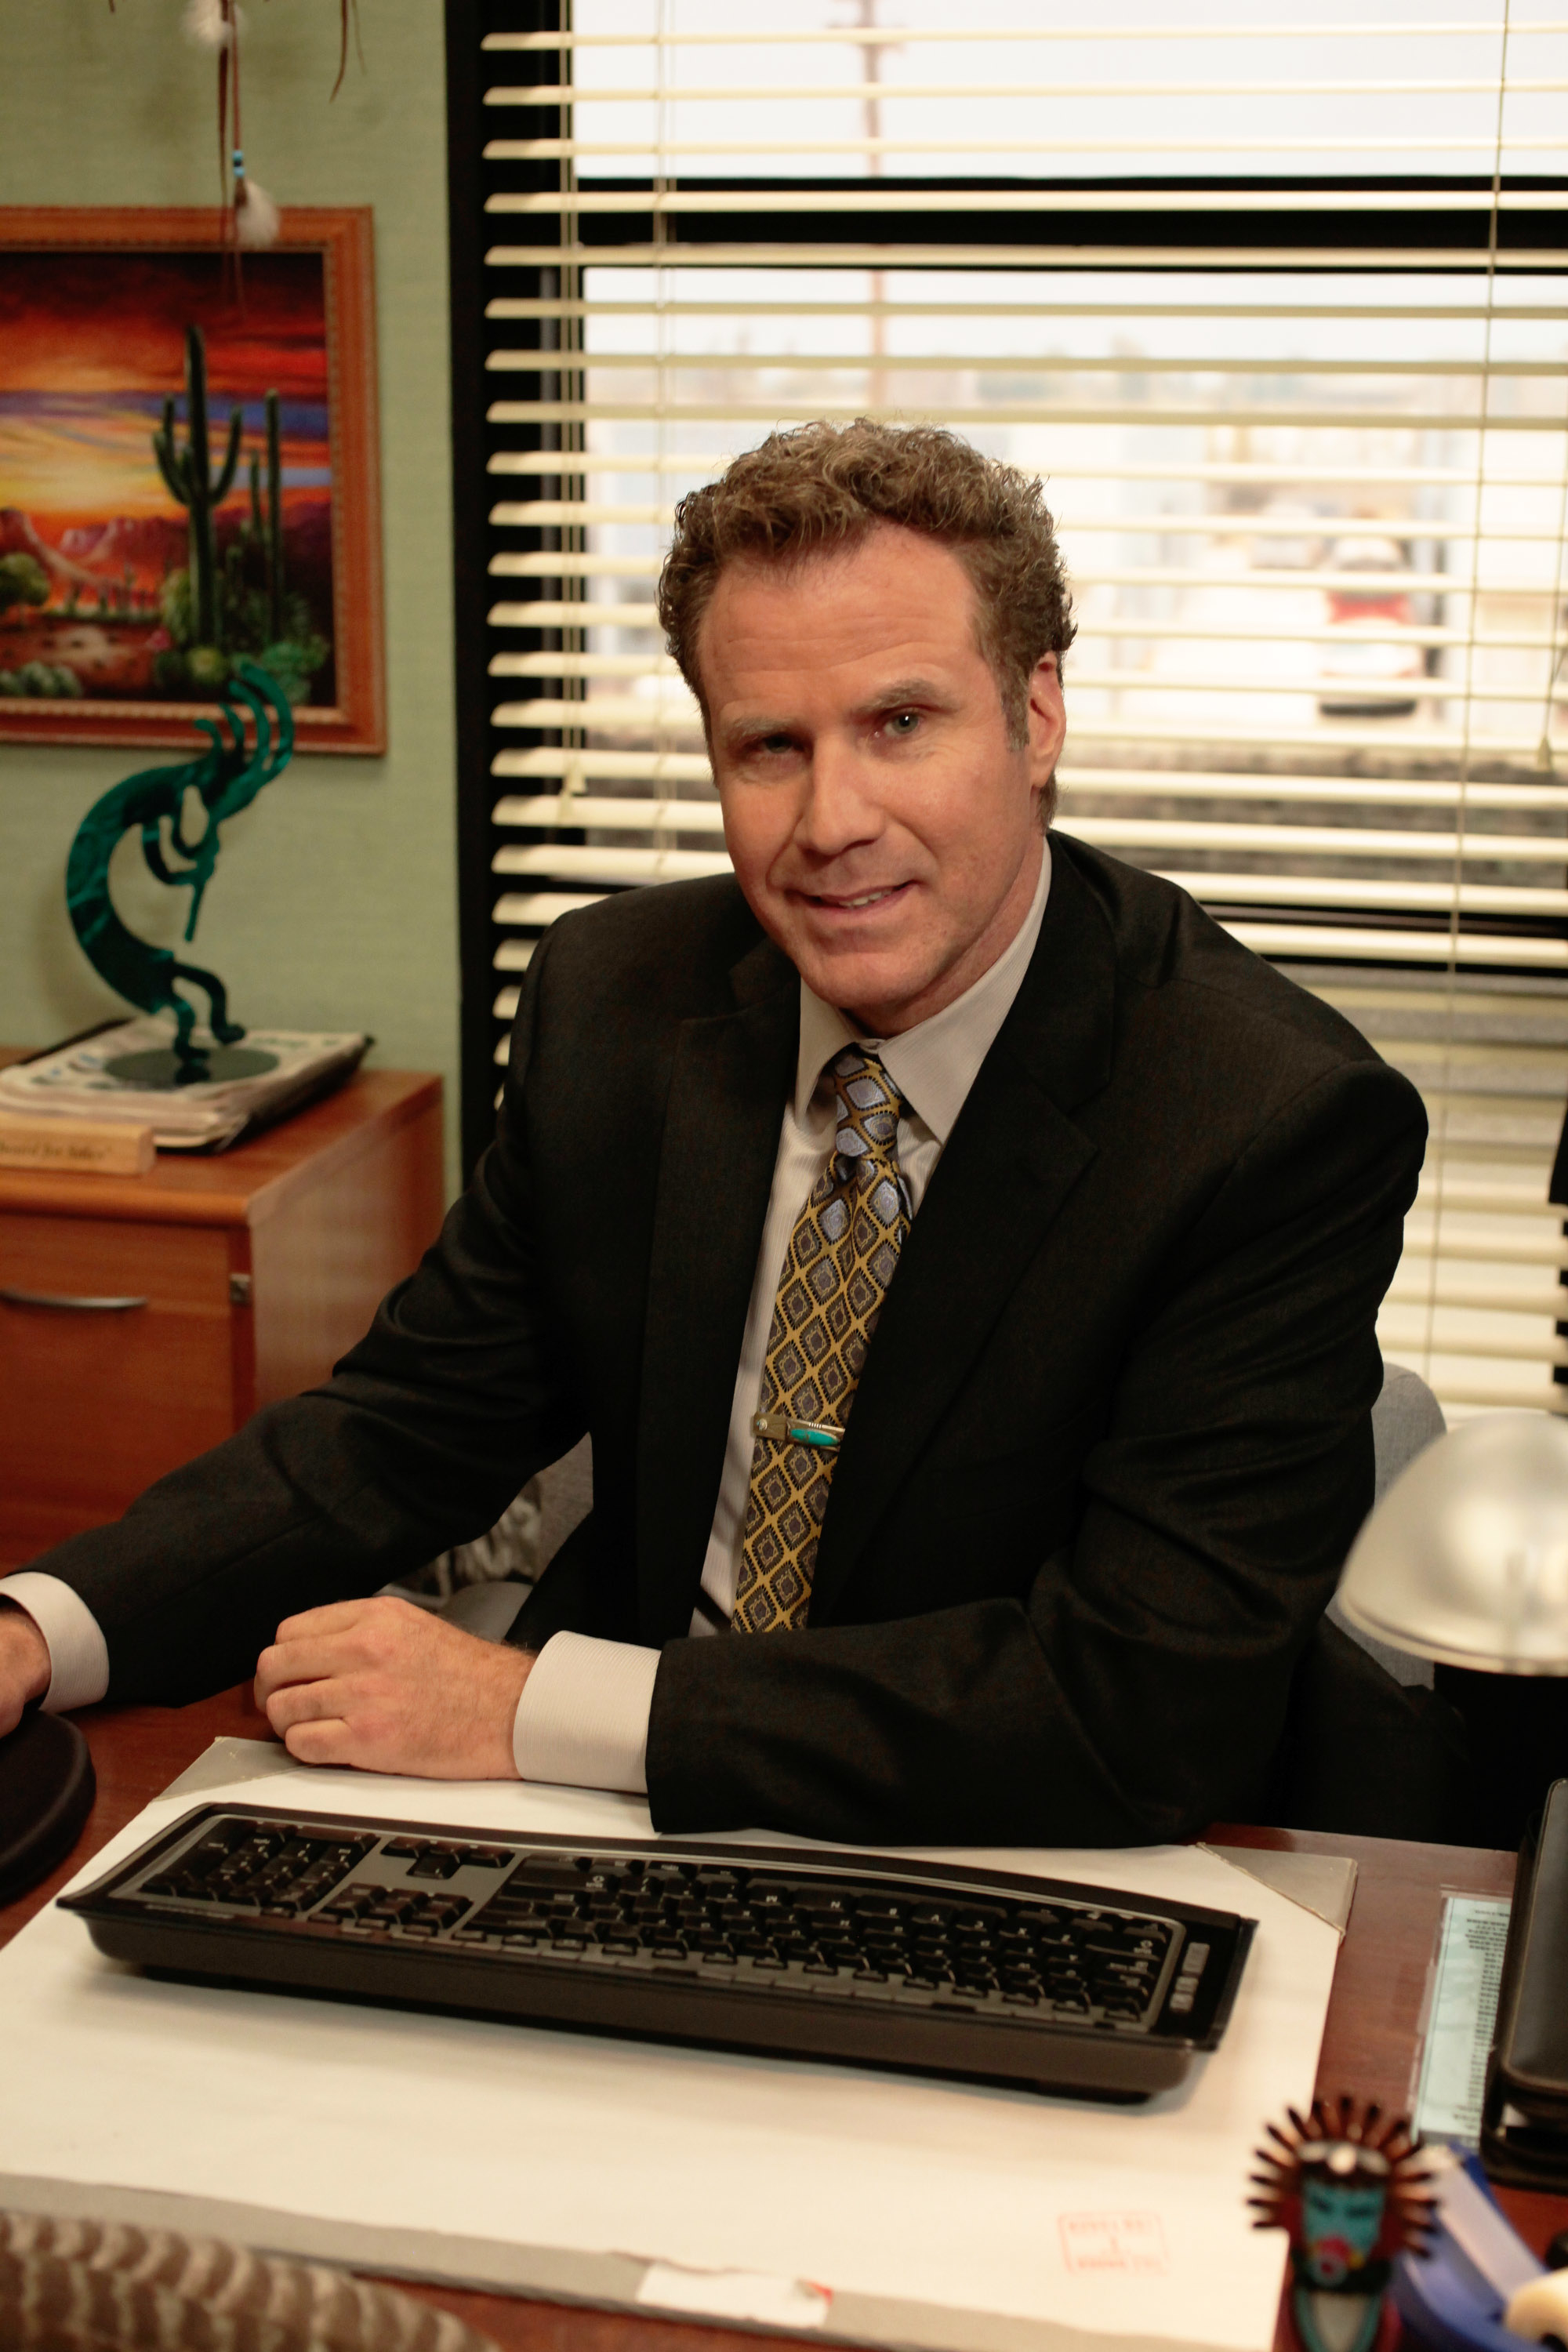 Deangelo dressed in a business suit, sitting at a desk in an office setting with a keyboard and various office decor surrounding him